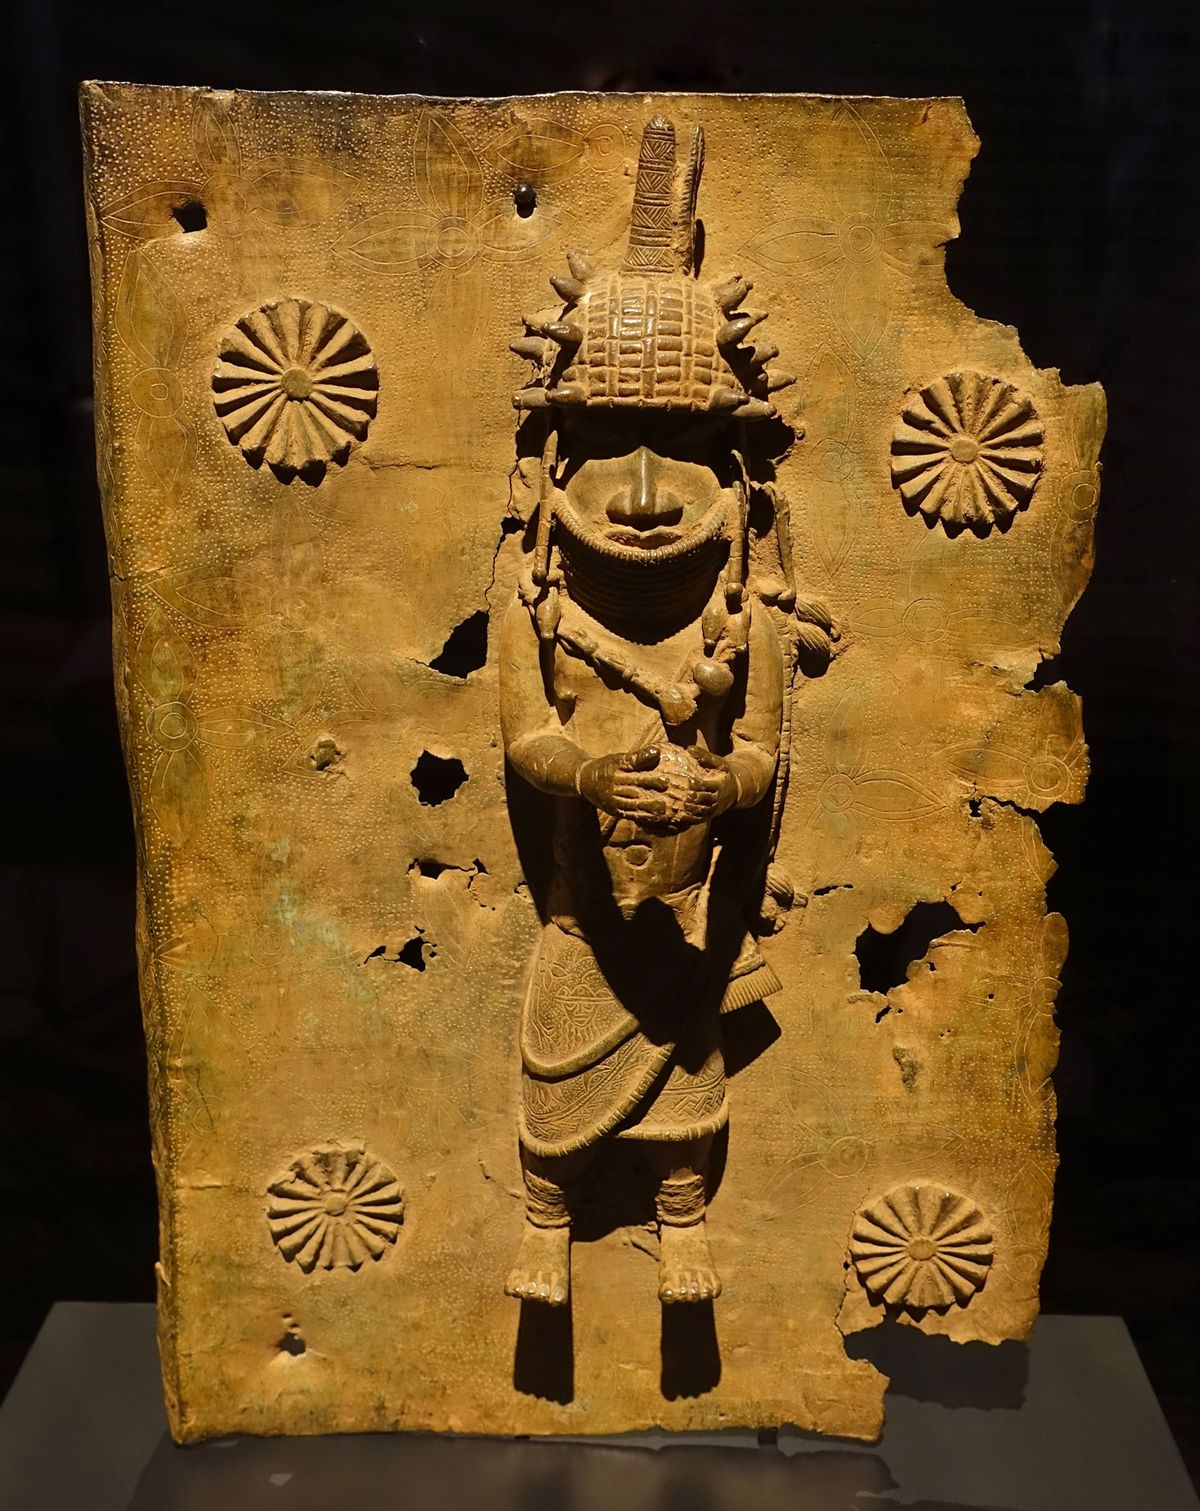 A relief plaque from the royal palace of the Kingdom of Benin, now in the collection of the Rautenstrauch-Joest-Museum of ethnography in Cologne Photo:	Daderot